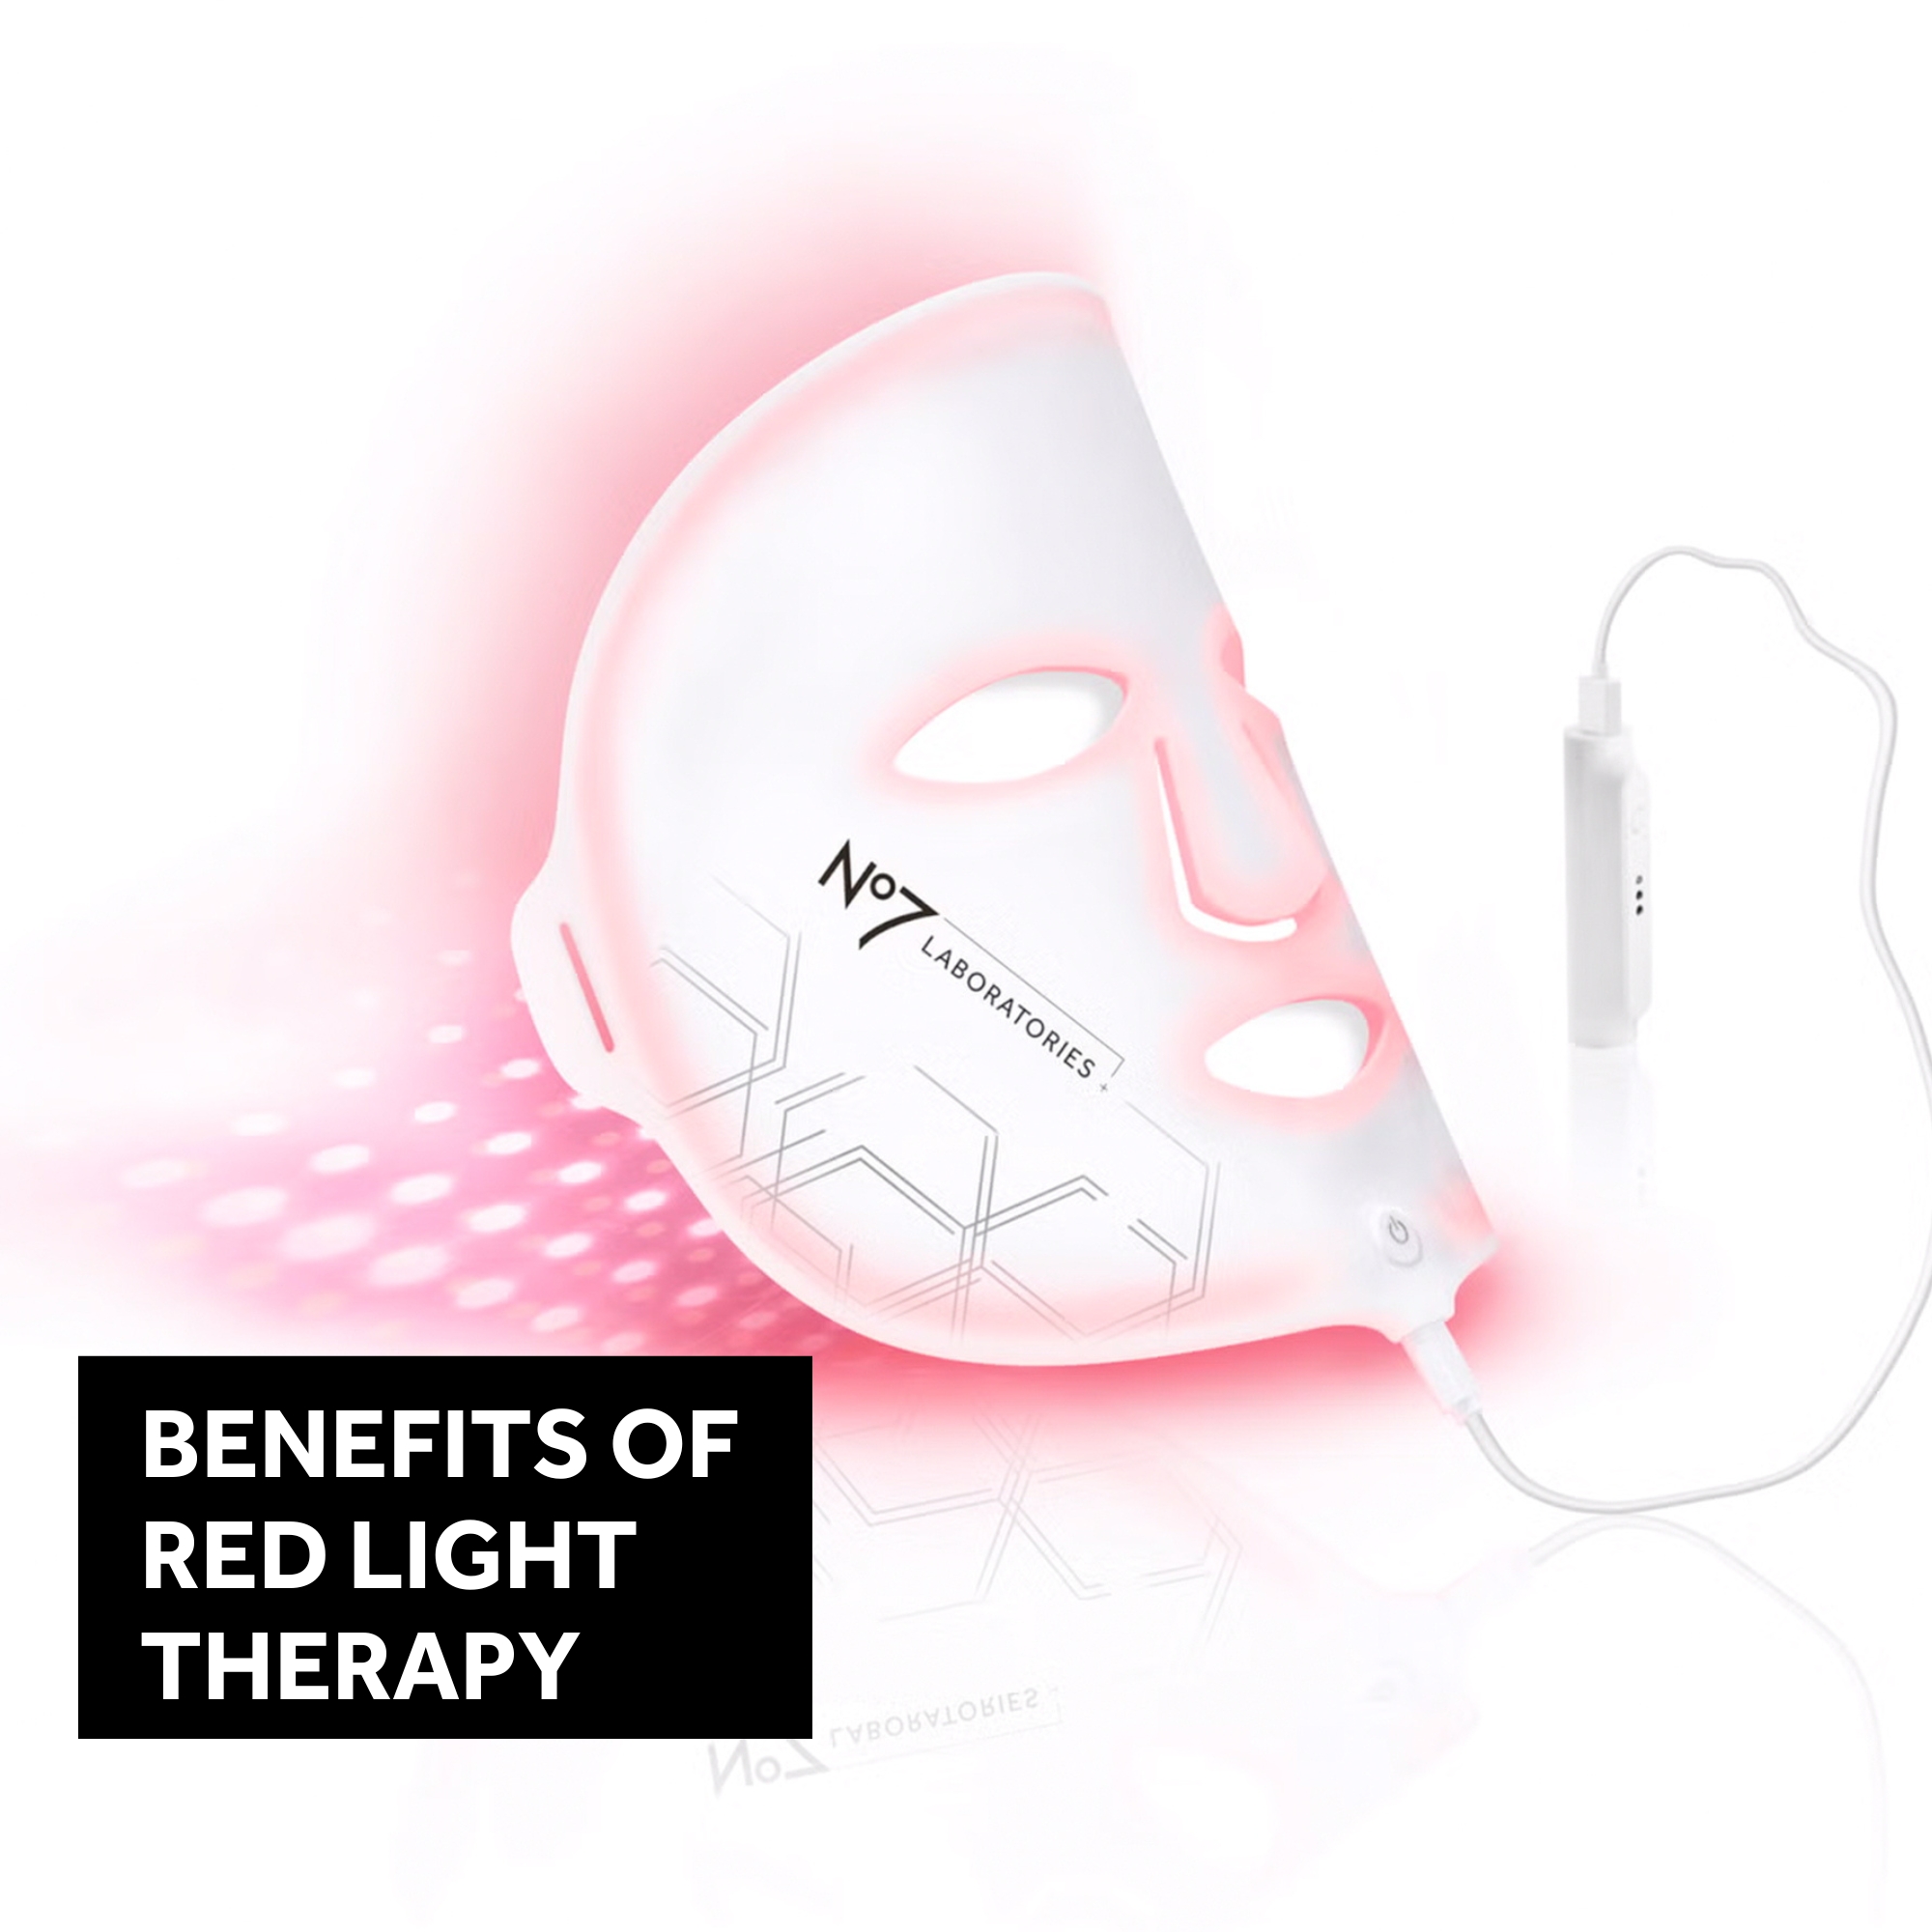 BENEFITS OF RED LIGHT THERAPY